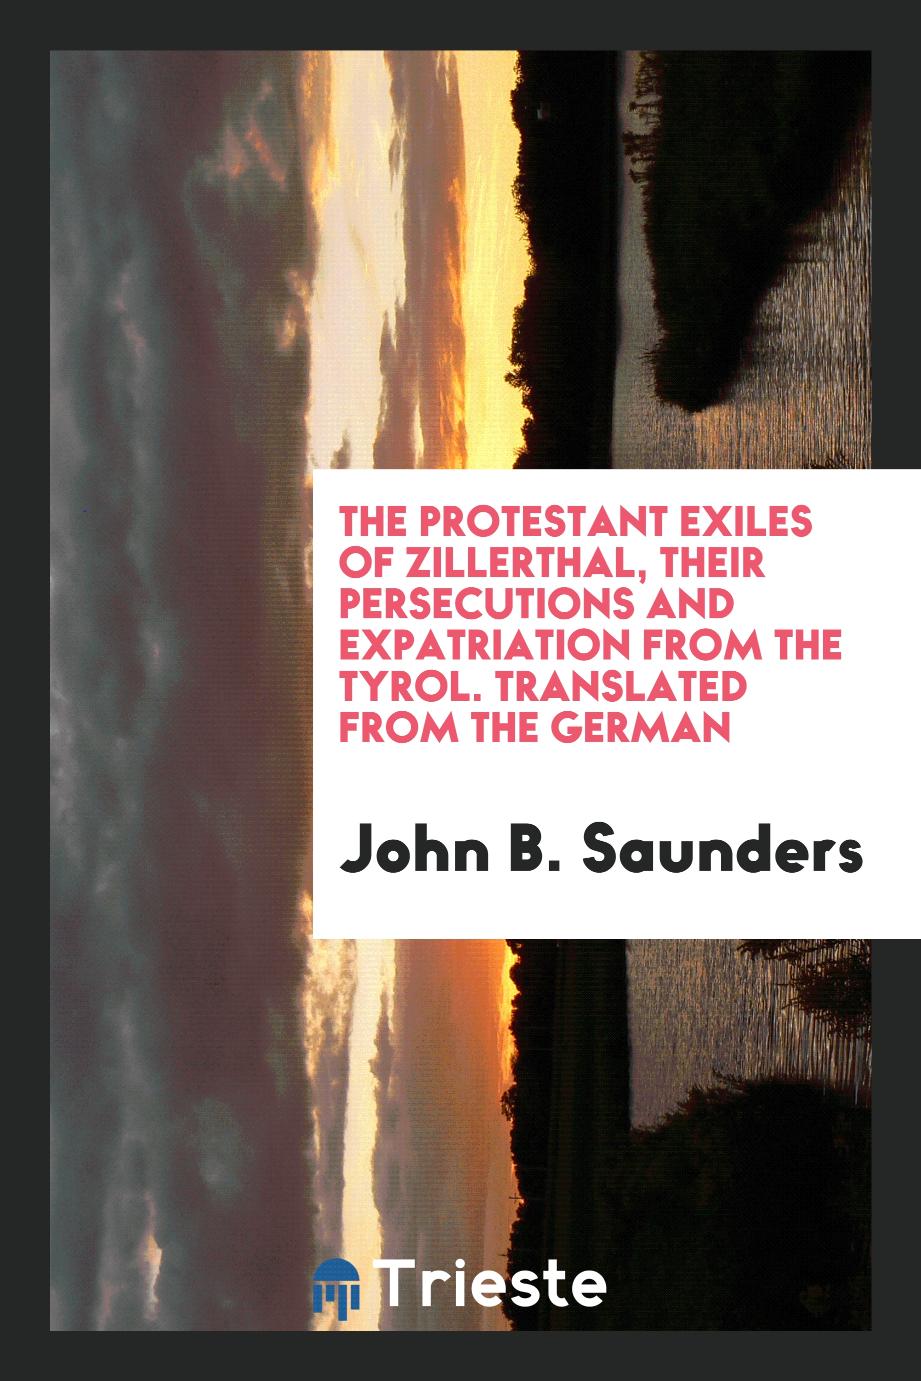 The Protestant Exiles of Zillerthal, Their Persecutions and Expatriation from the Tyrol. Translated from the German